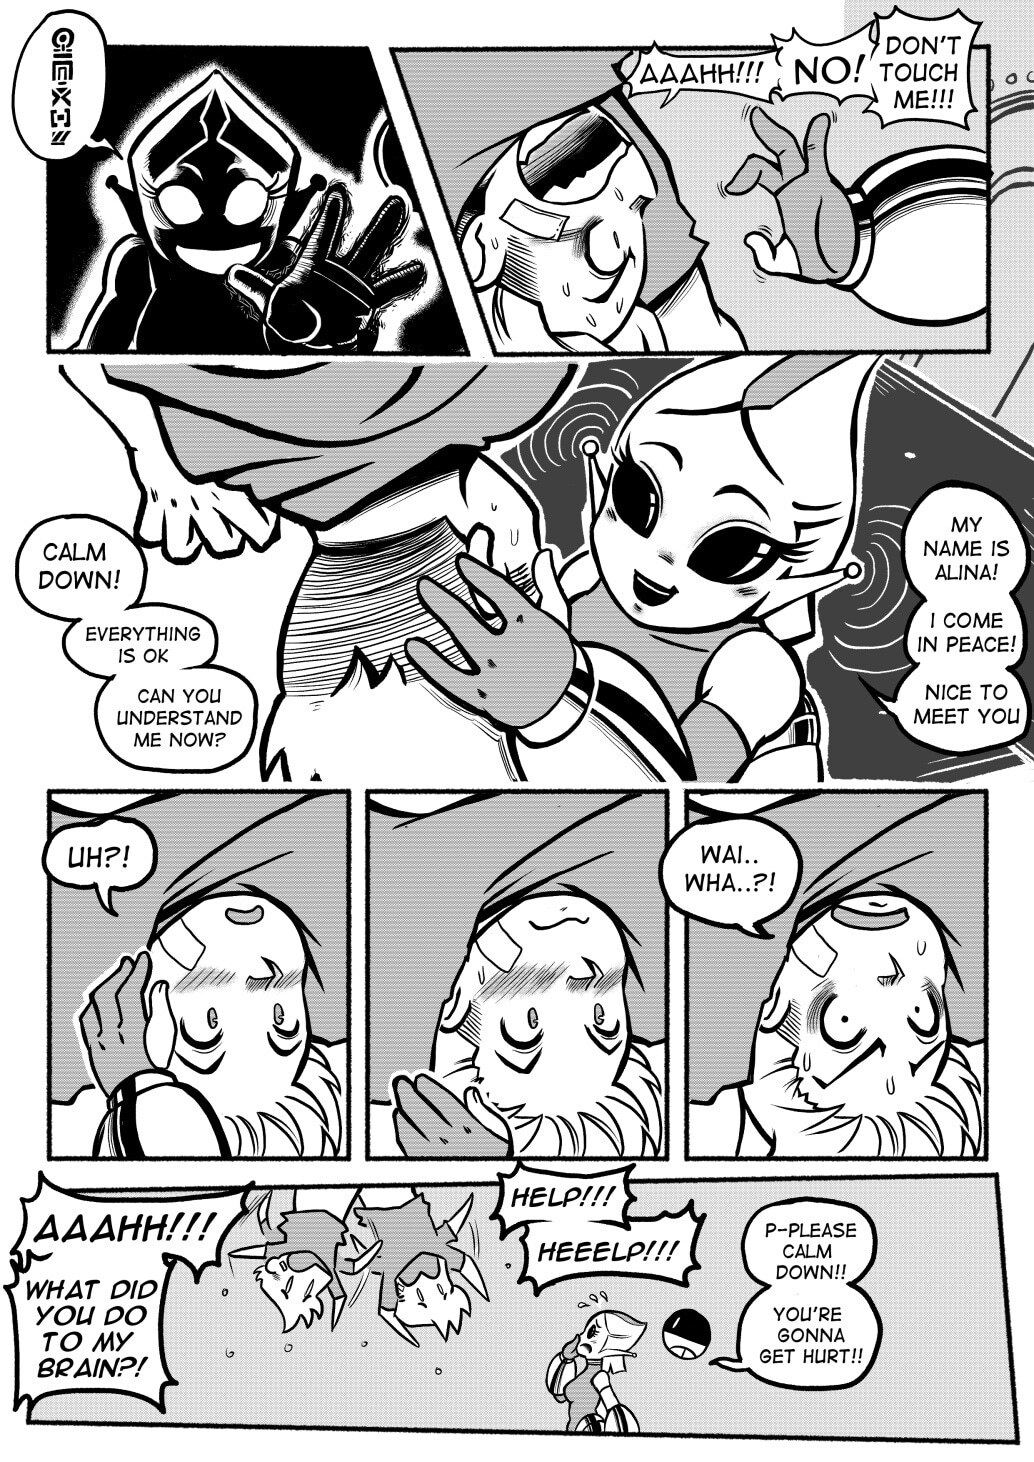 Abducted! - Mr.E - Page 6